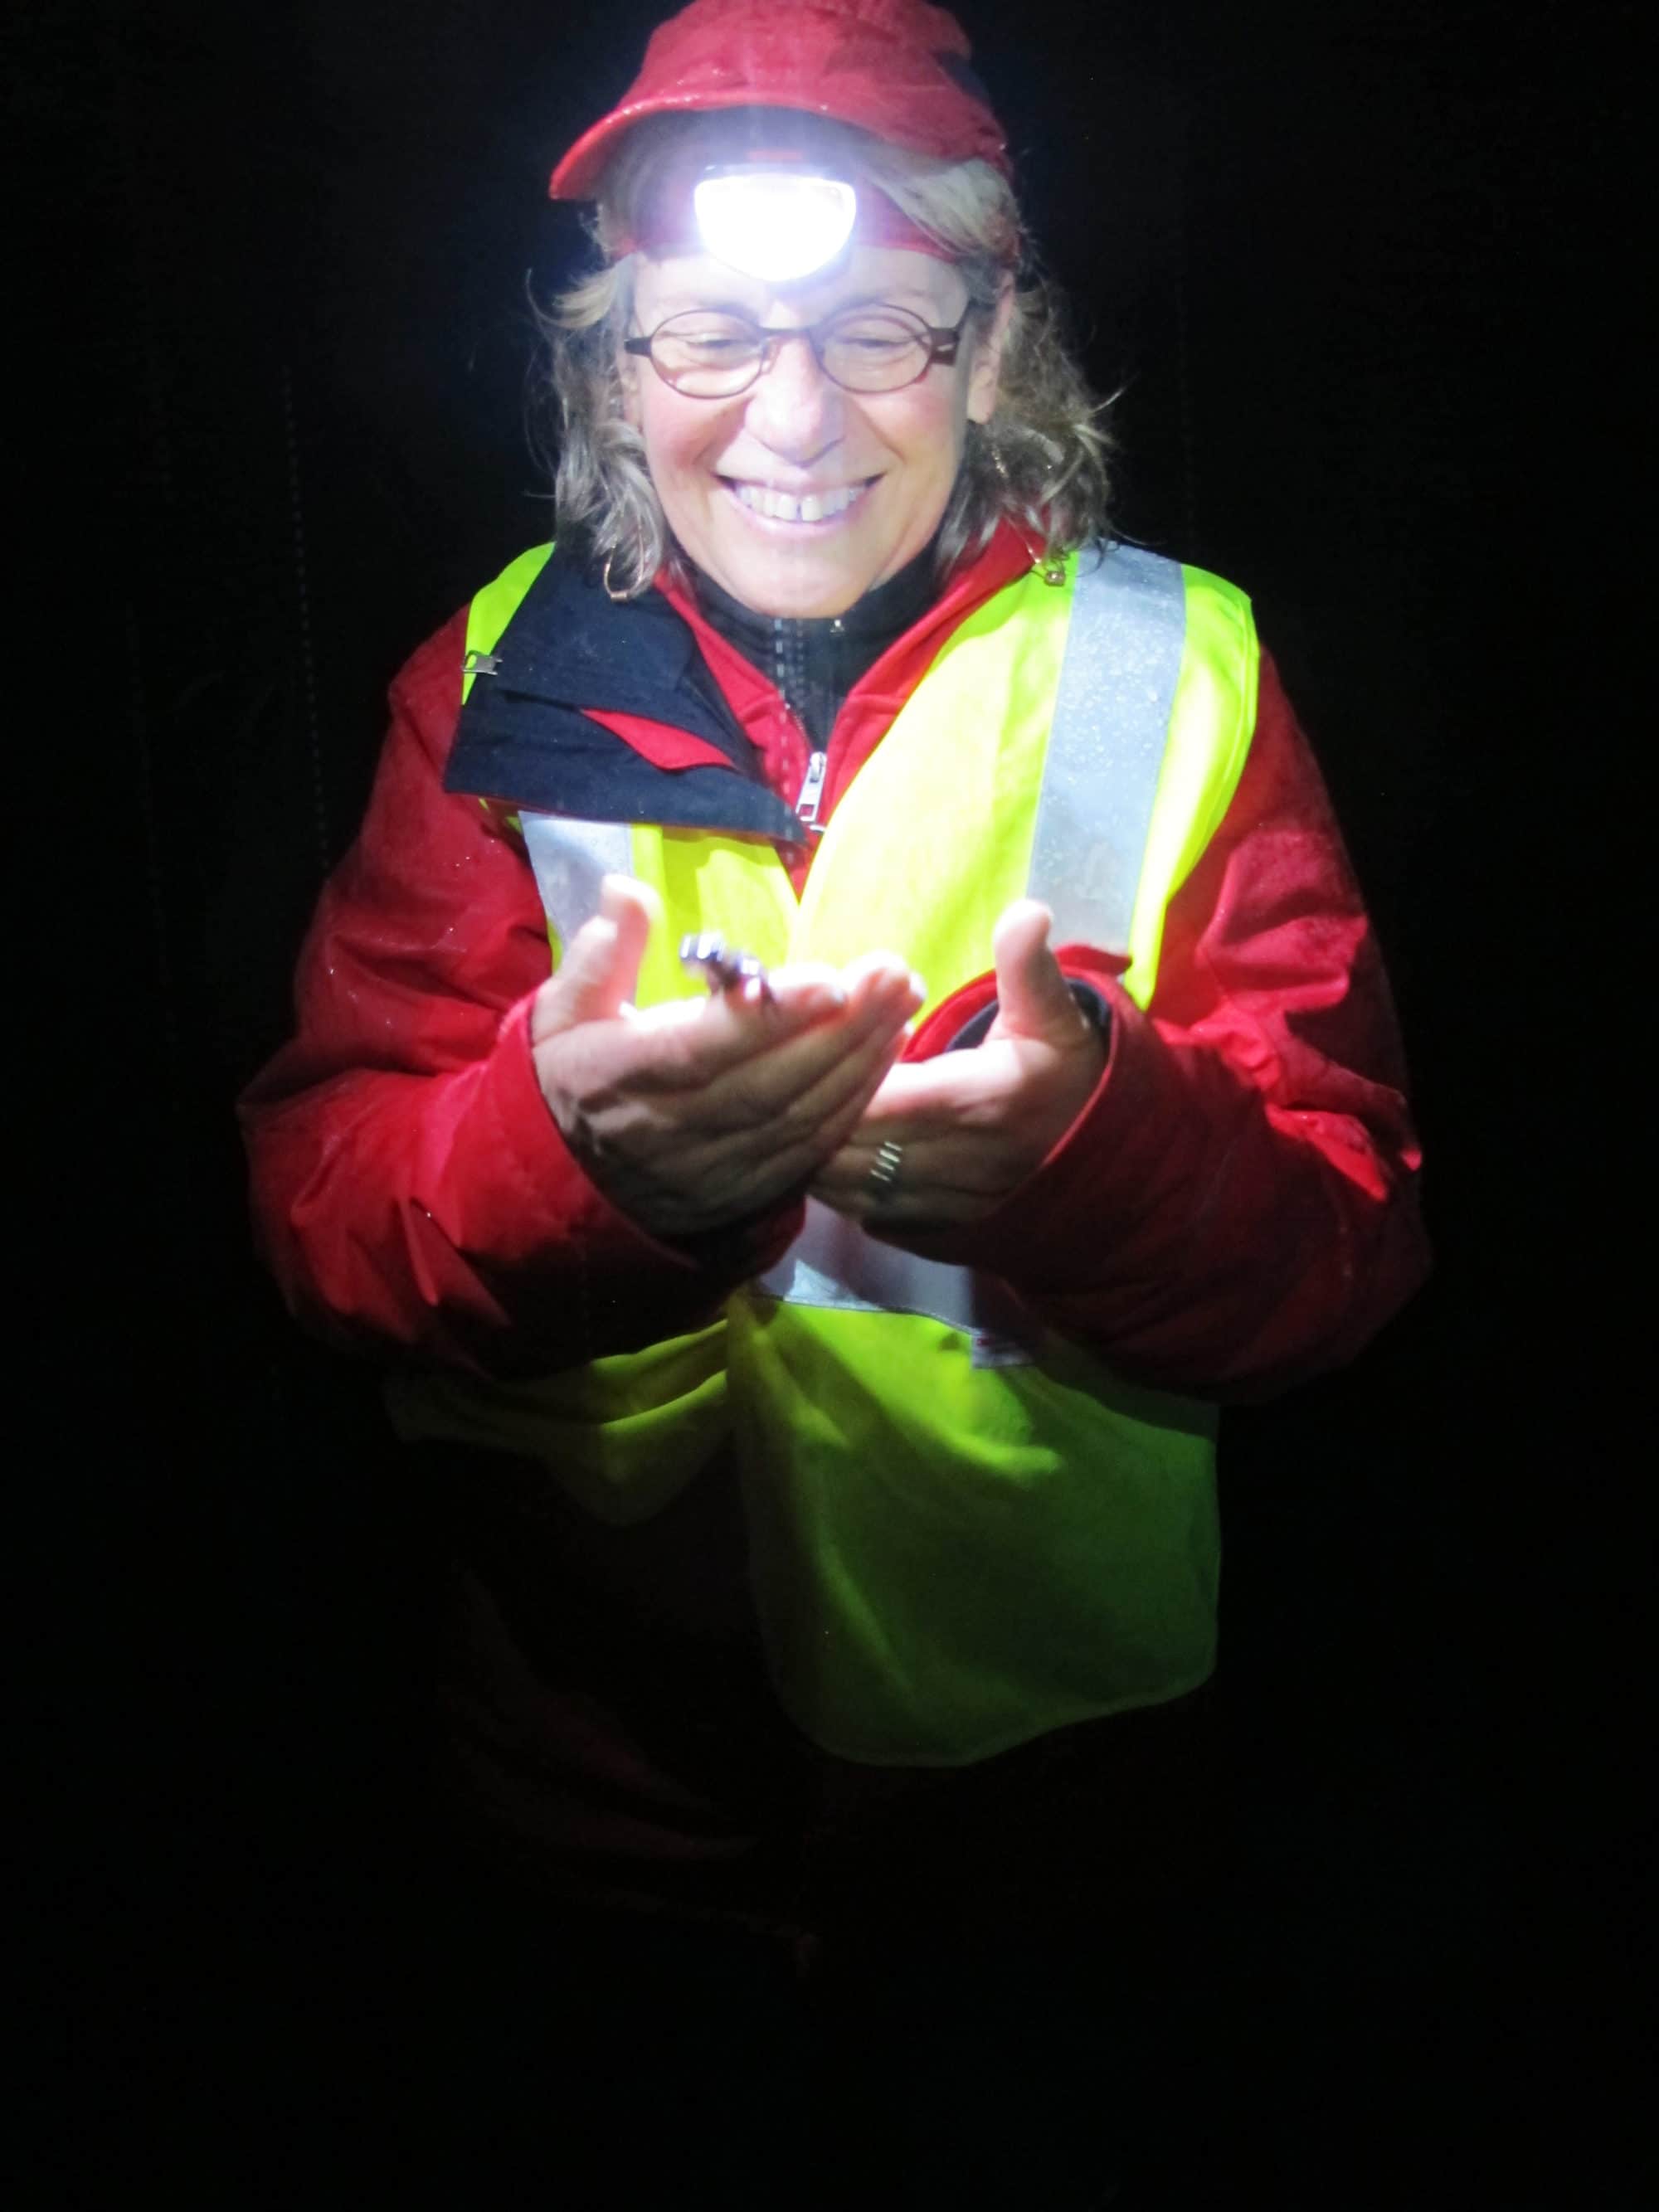 A Crossing Brigade volunteer holds a spotted salamander. (photo © Brett Amy Thelen)